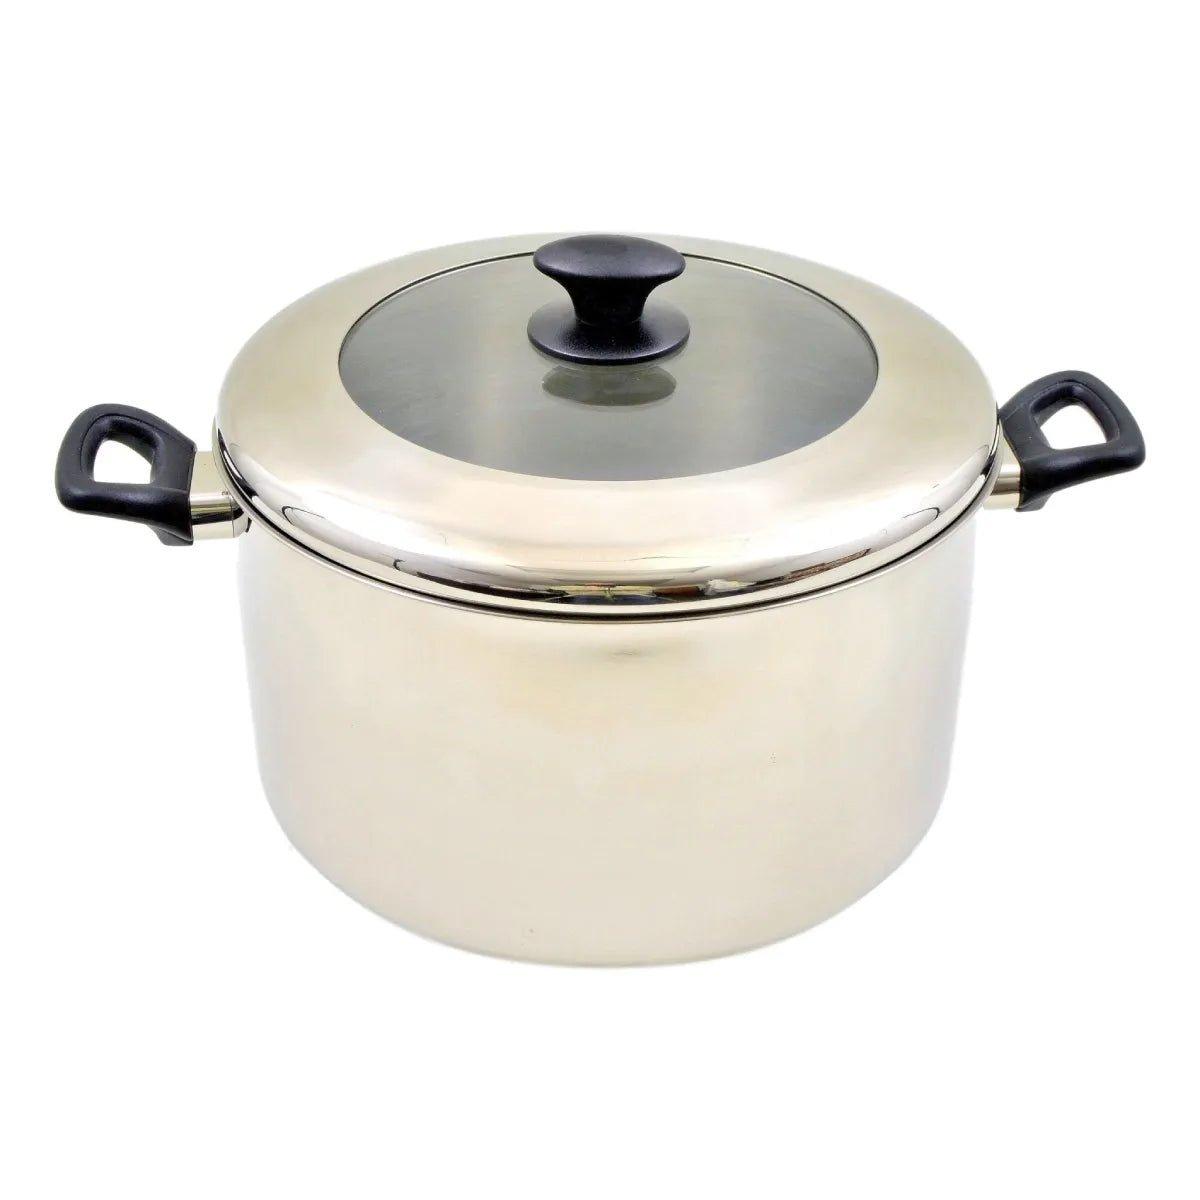 Stainless Steel Stock Pot with Glass Lid - Nature Home Decor